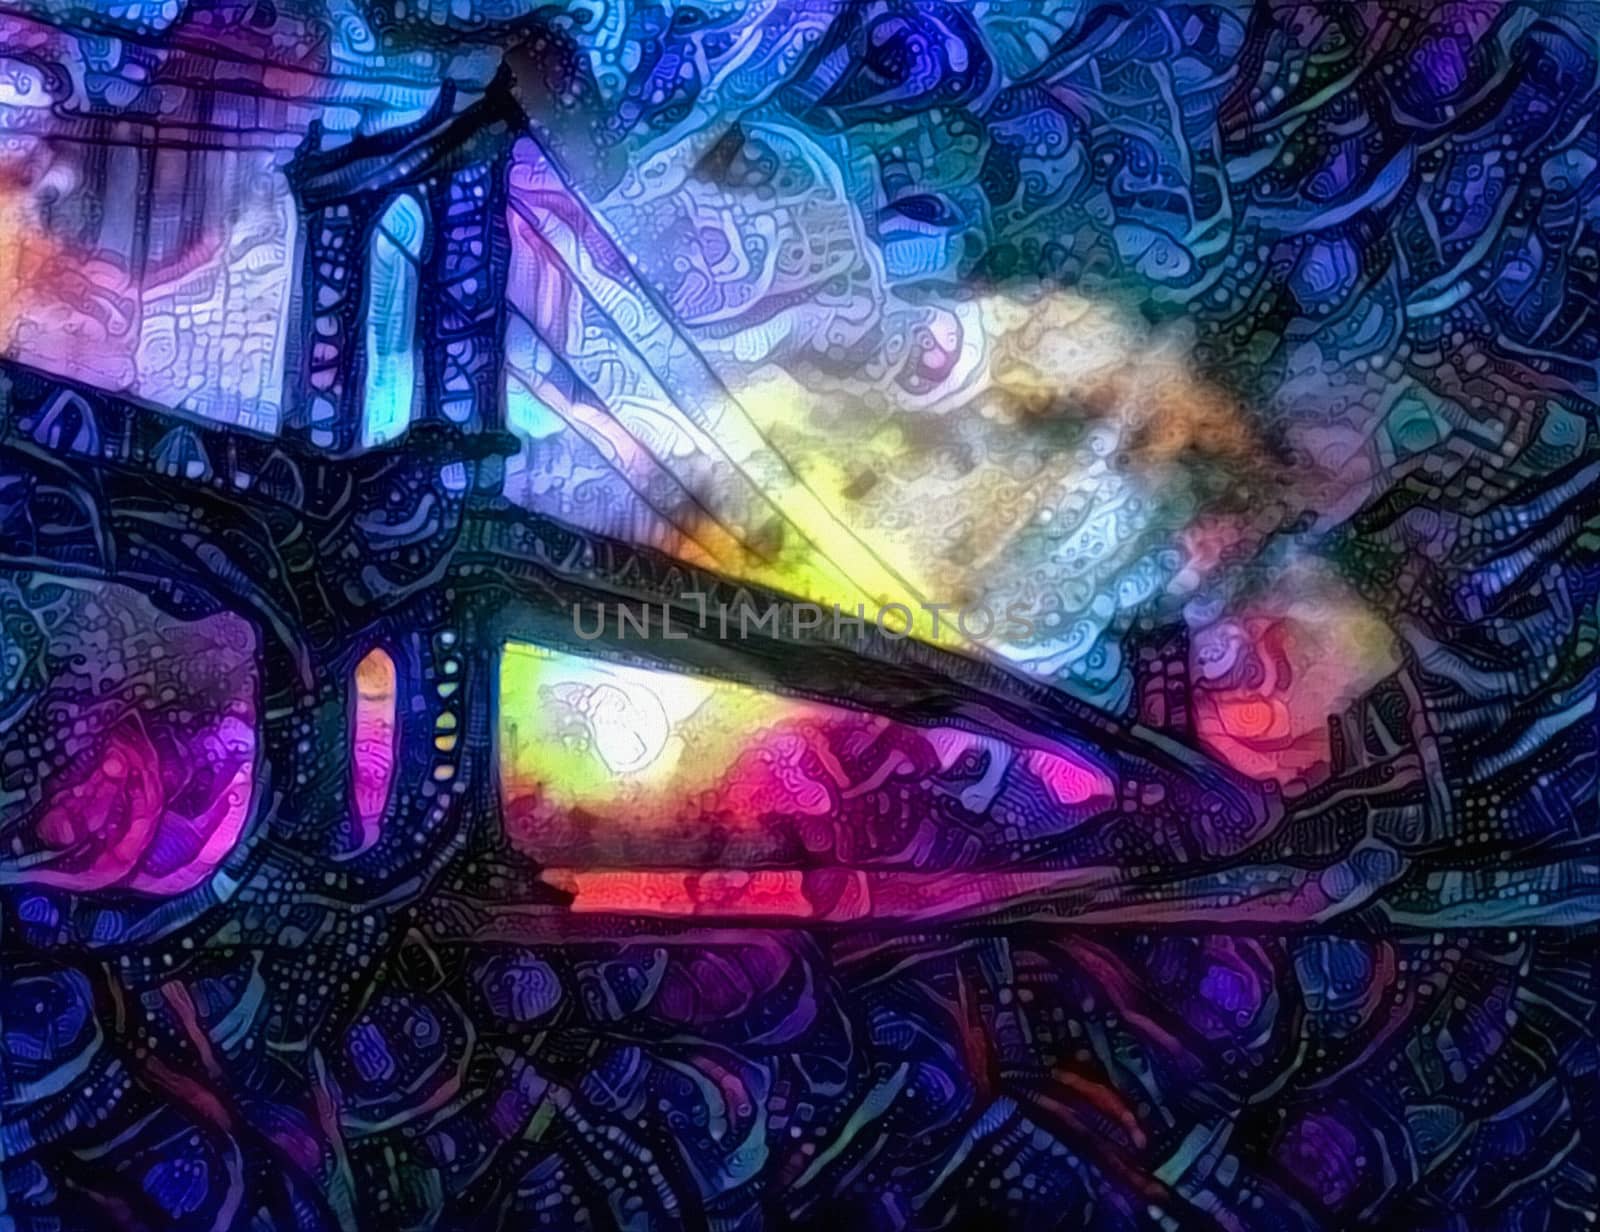 Abstract painting in vivid colors with mystic pattern. Manhattan bridge